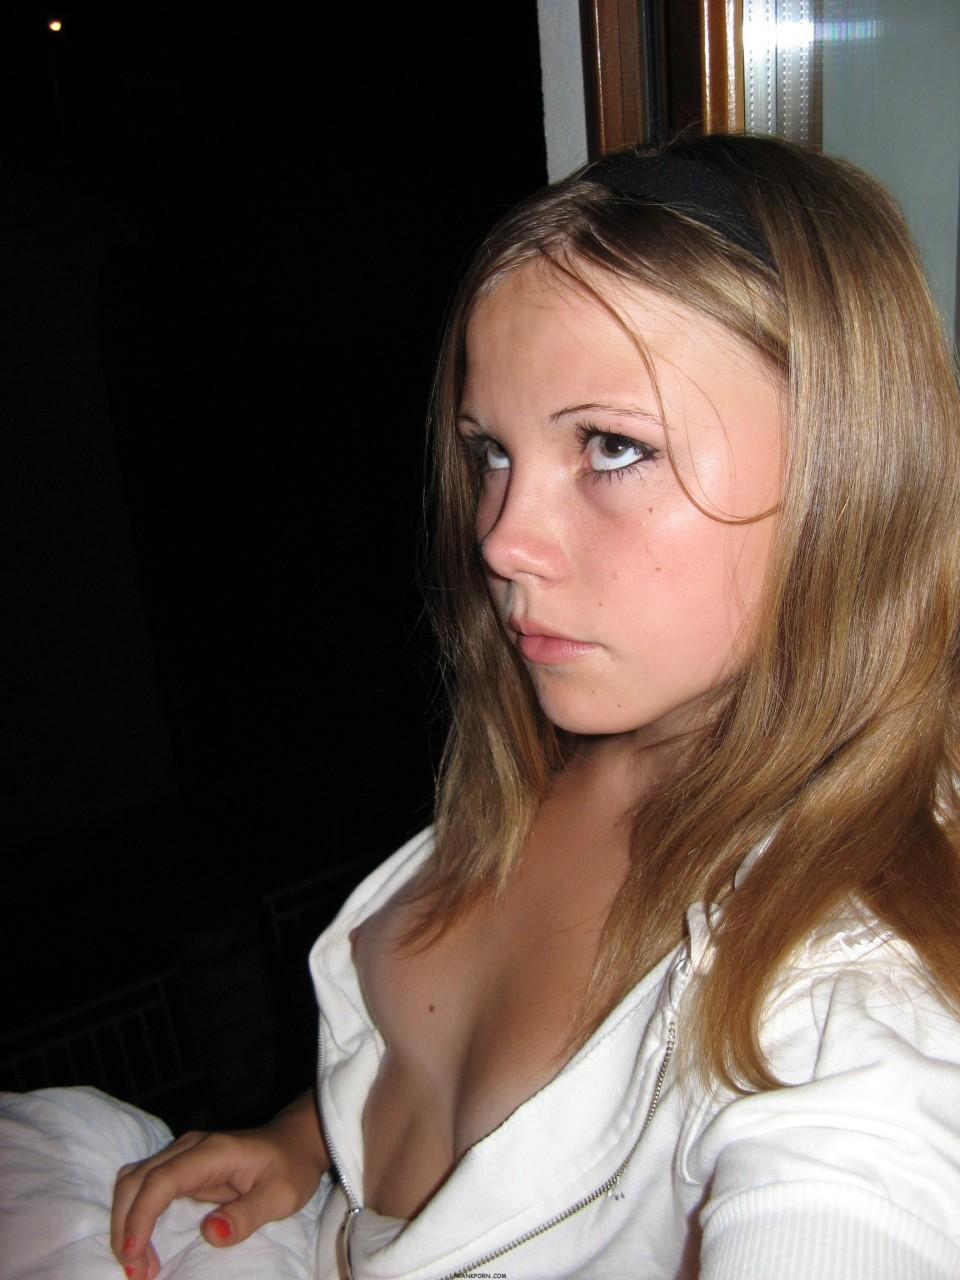 Downblouse small tits Very hot pics 100% free picture photo